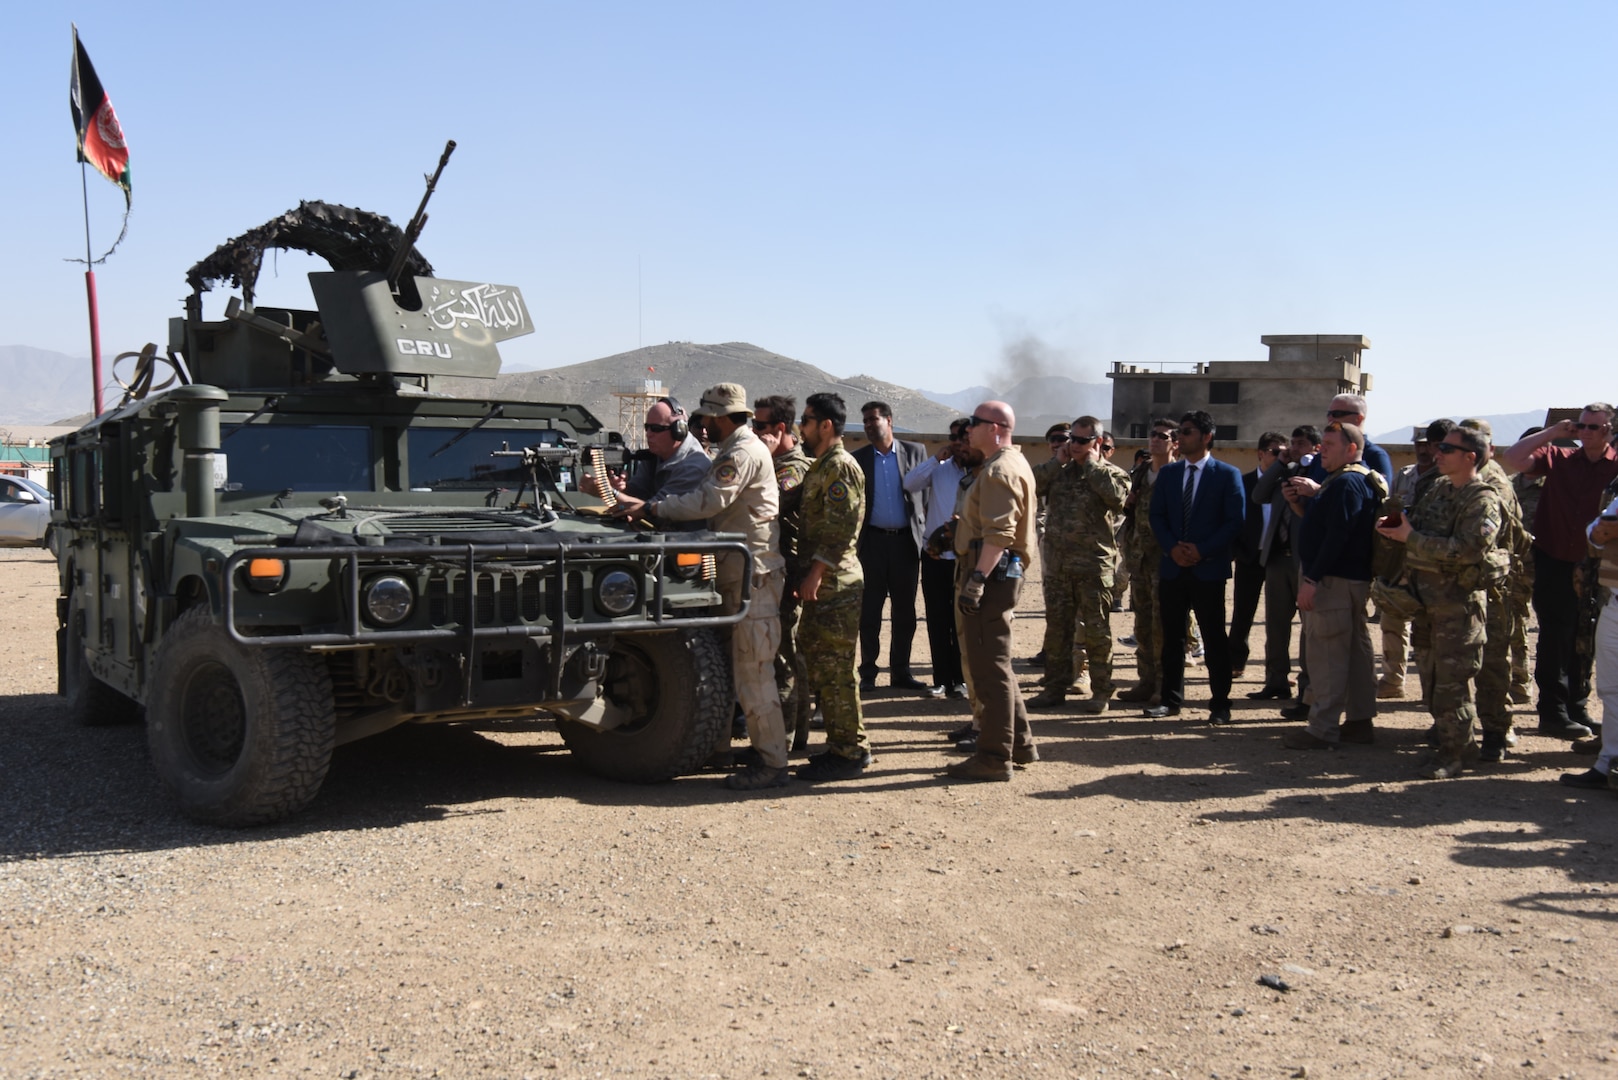 NYPD Police Commissioner James O’Neil (center) fires an M249 Squad Automatic Weapon during his visit to the Crisis Response Unit (CRU) 222 in Kabul, Afghanistan, Apr. 11, 2018. Critical Response Unit (CRU) 222 is one of three National Mission Units that fall under the command and control of the General Command Police Special Unit. CRU 222 is the primary Afghan National Defense and Security Forces (ANDSF) capability for providing rapid response to high profile attacks within Kabul and the diplomatic community.